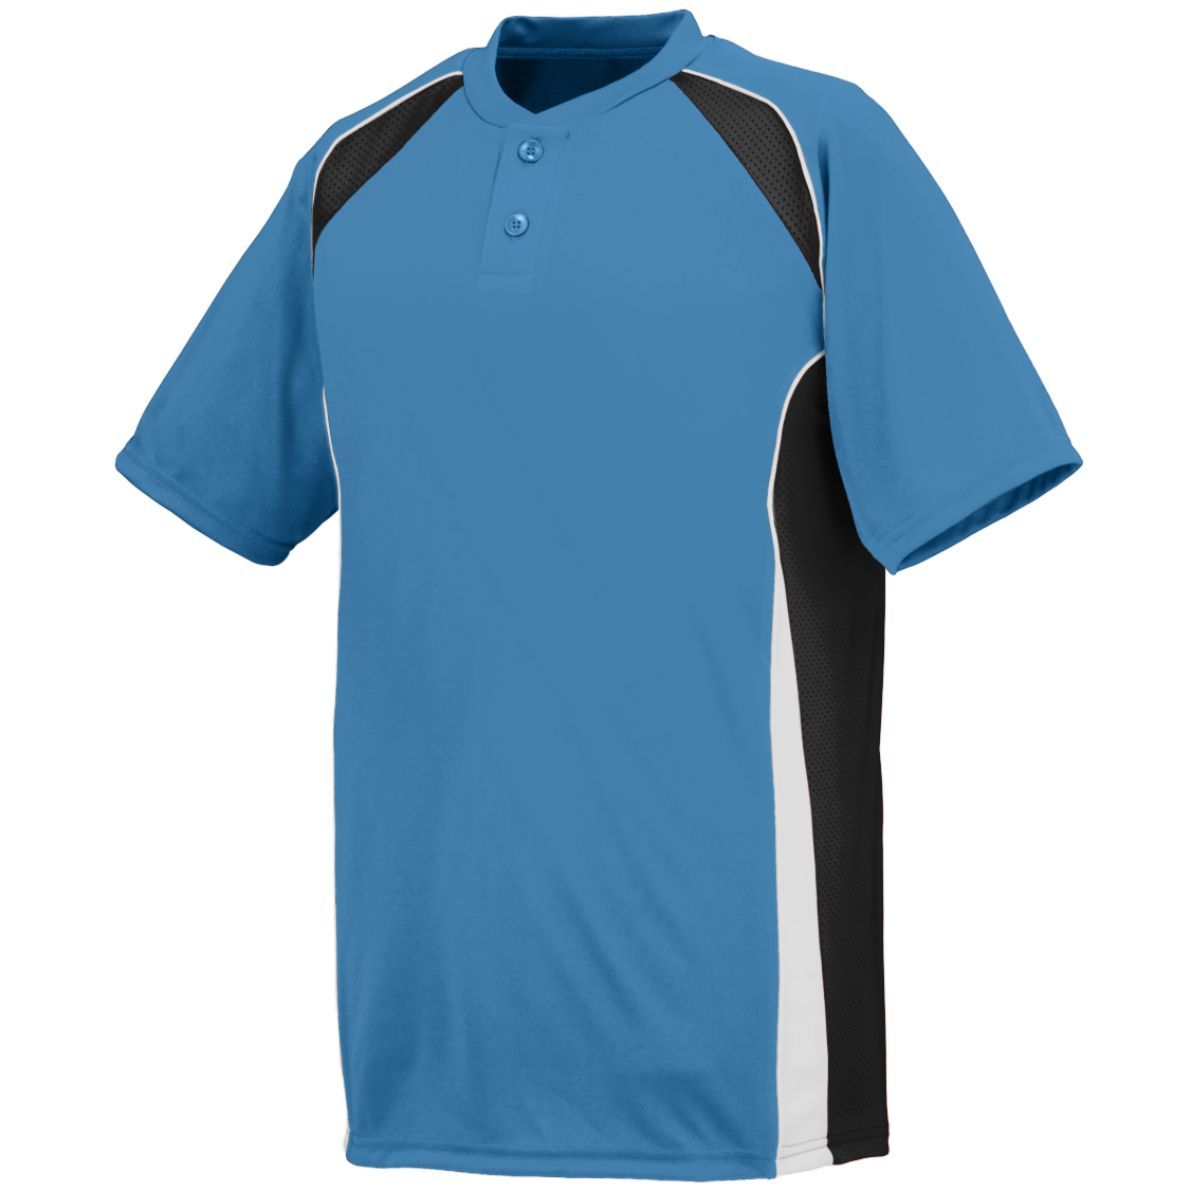 Augusta Sportswear Base Hit Jersey in Columbia Blue/Black/White  -Part of the Adult, Adult-Jersey, Augusta-Products, Baseball, Shirts, All-Sports, All-Sports-1 product lines at KanaleyCreations.com